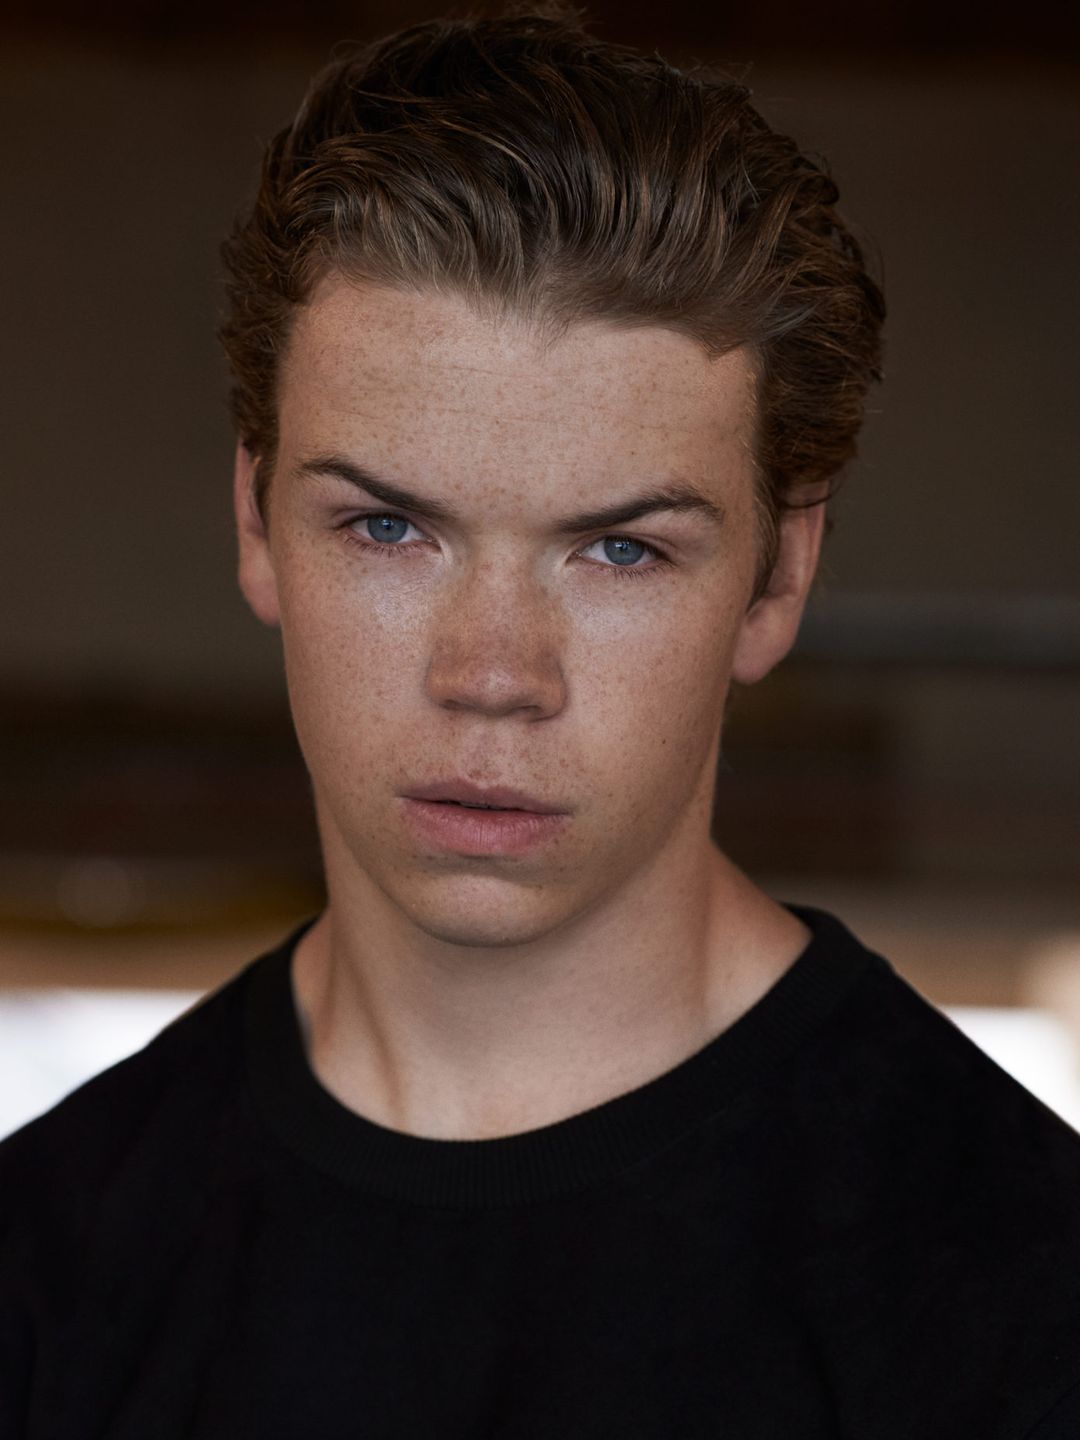 Will Poulter way to fame